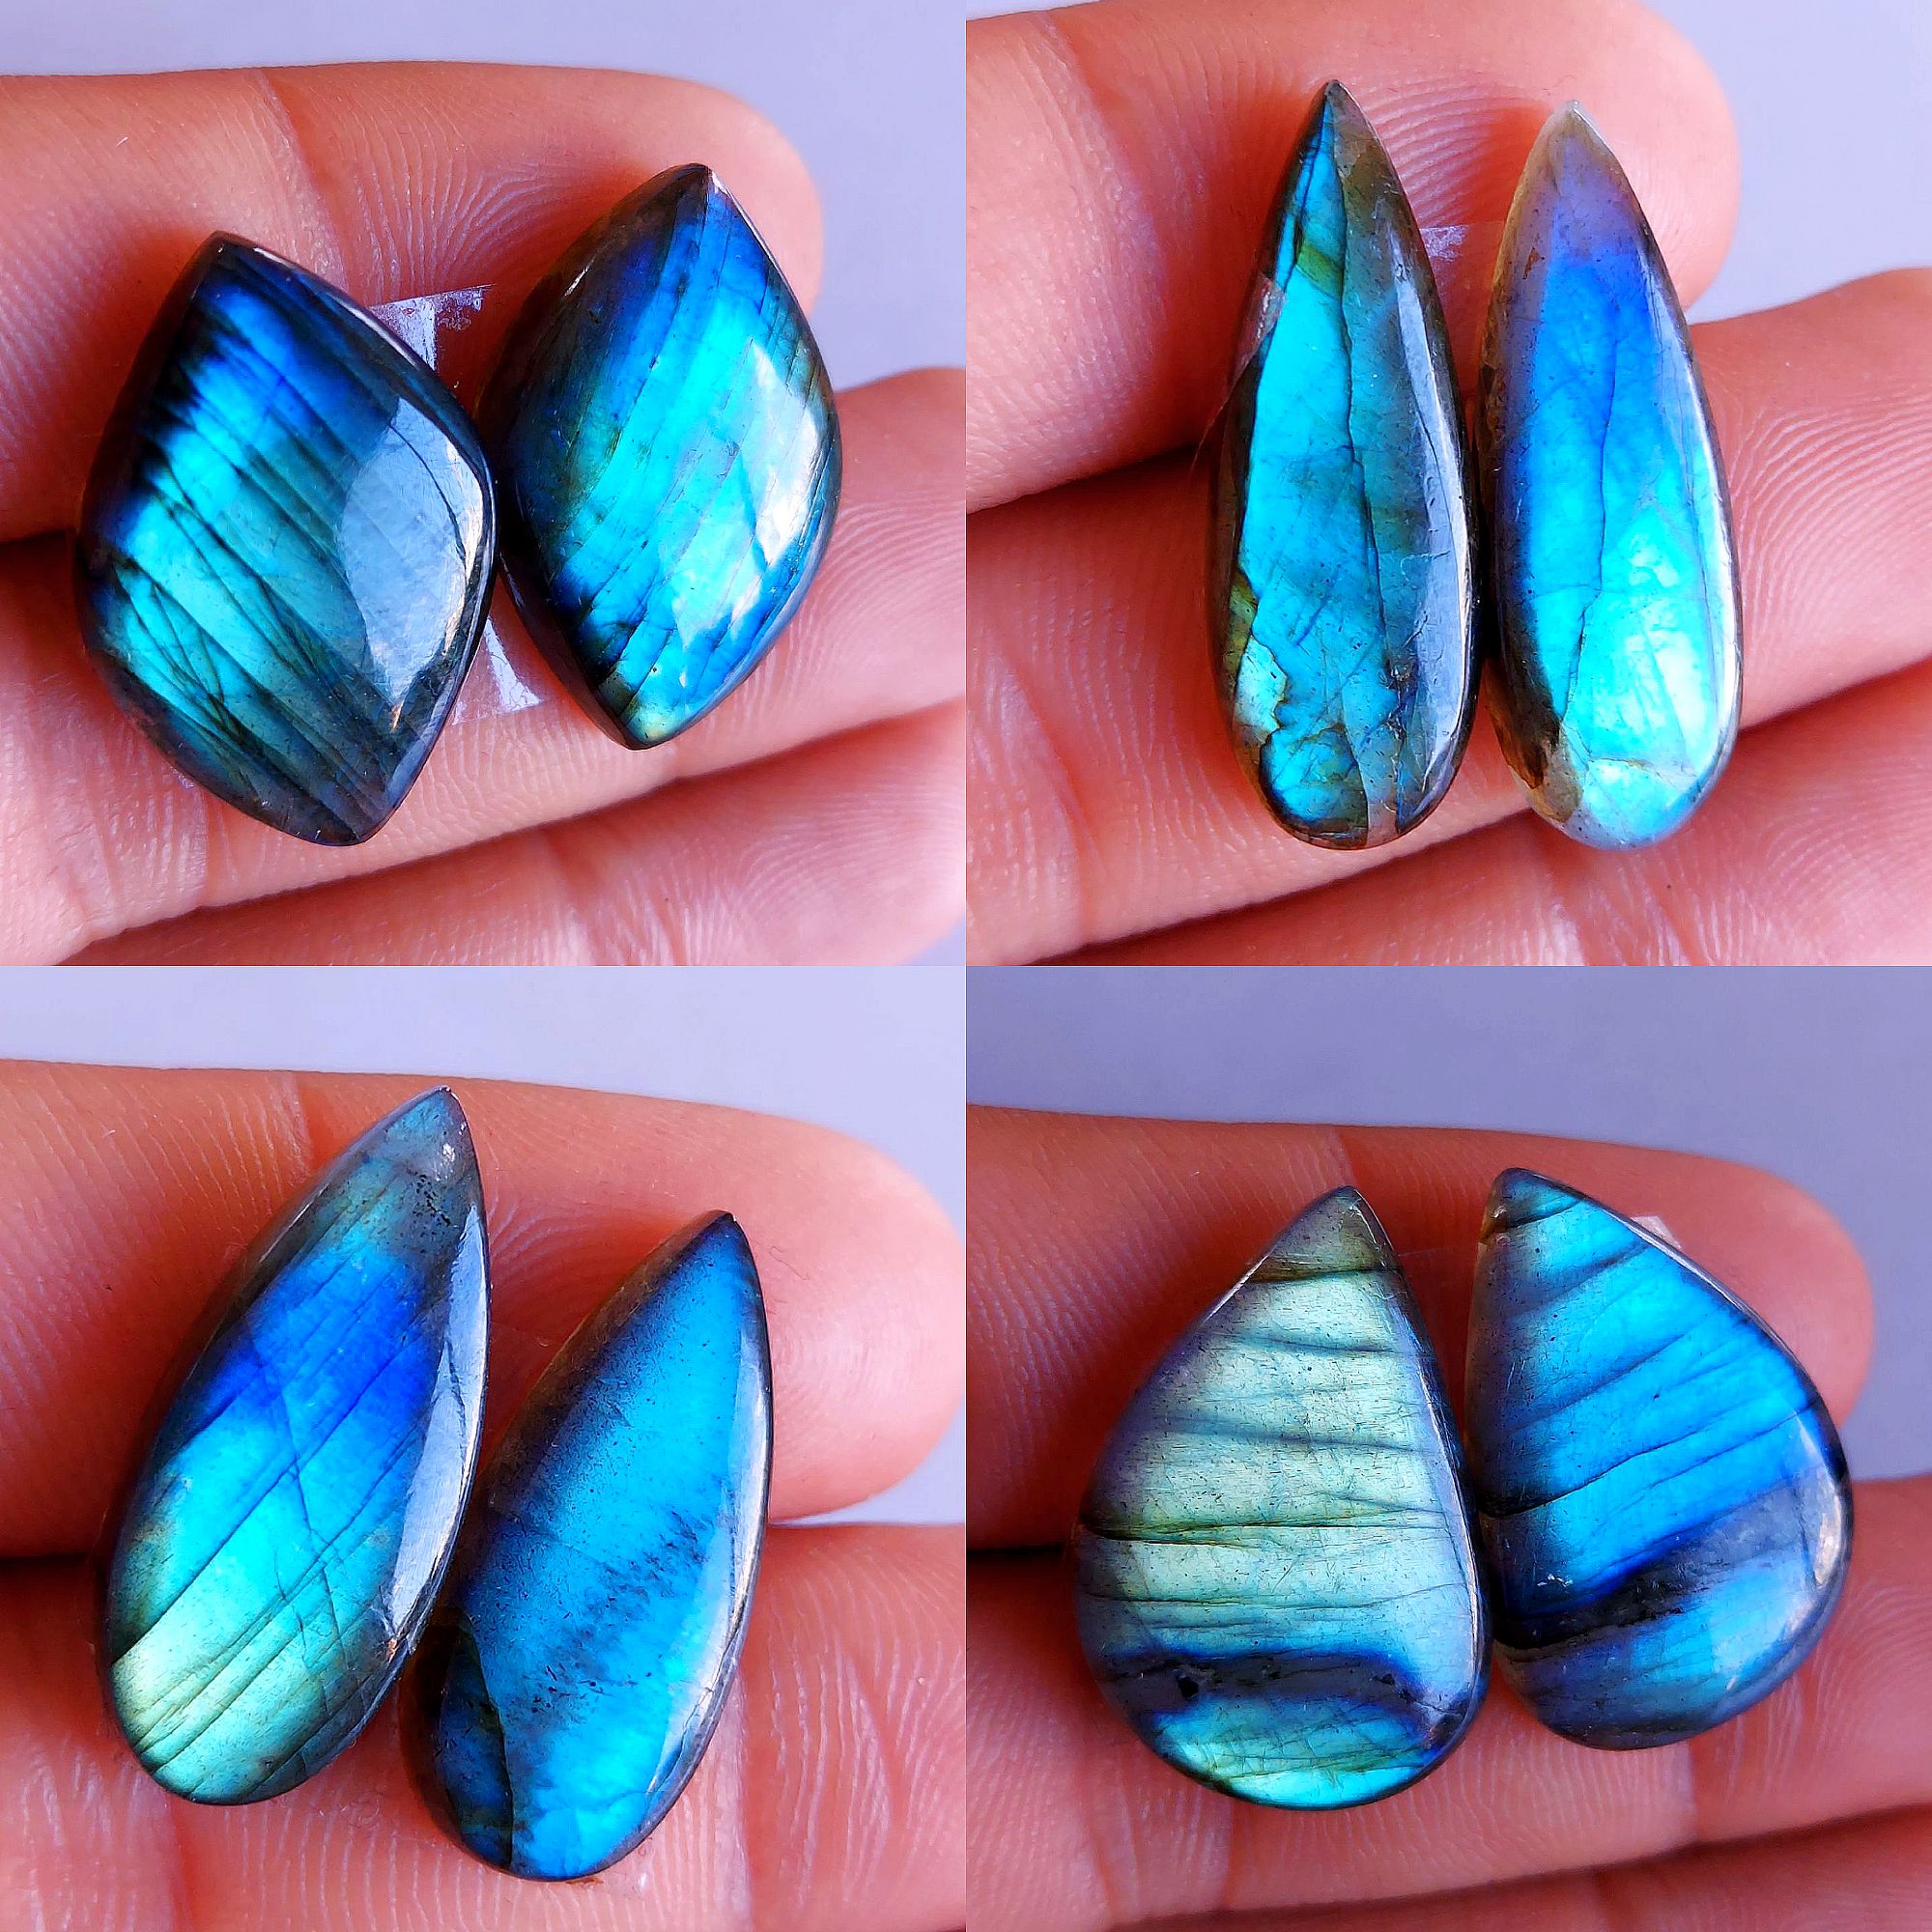 4 Pairs lot 121Cts Natural Labradorite cabochon pair lot for jewelry making loose gemstone lot mix shape and size earring pairs 24x15 23x15mm